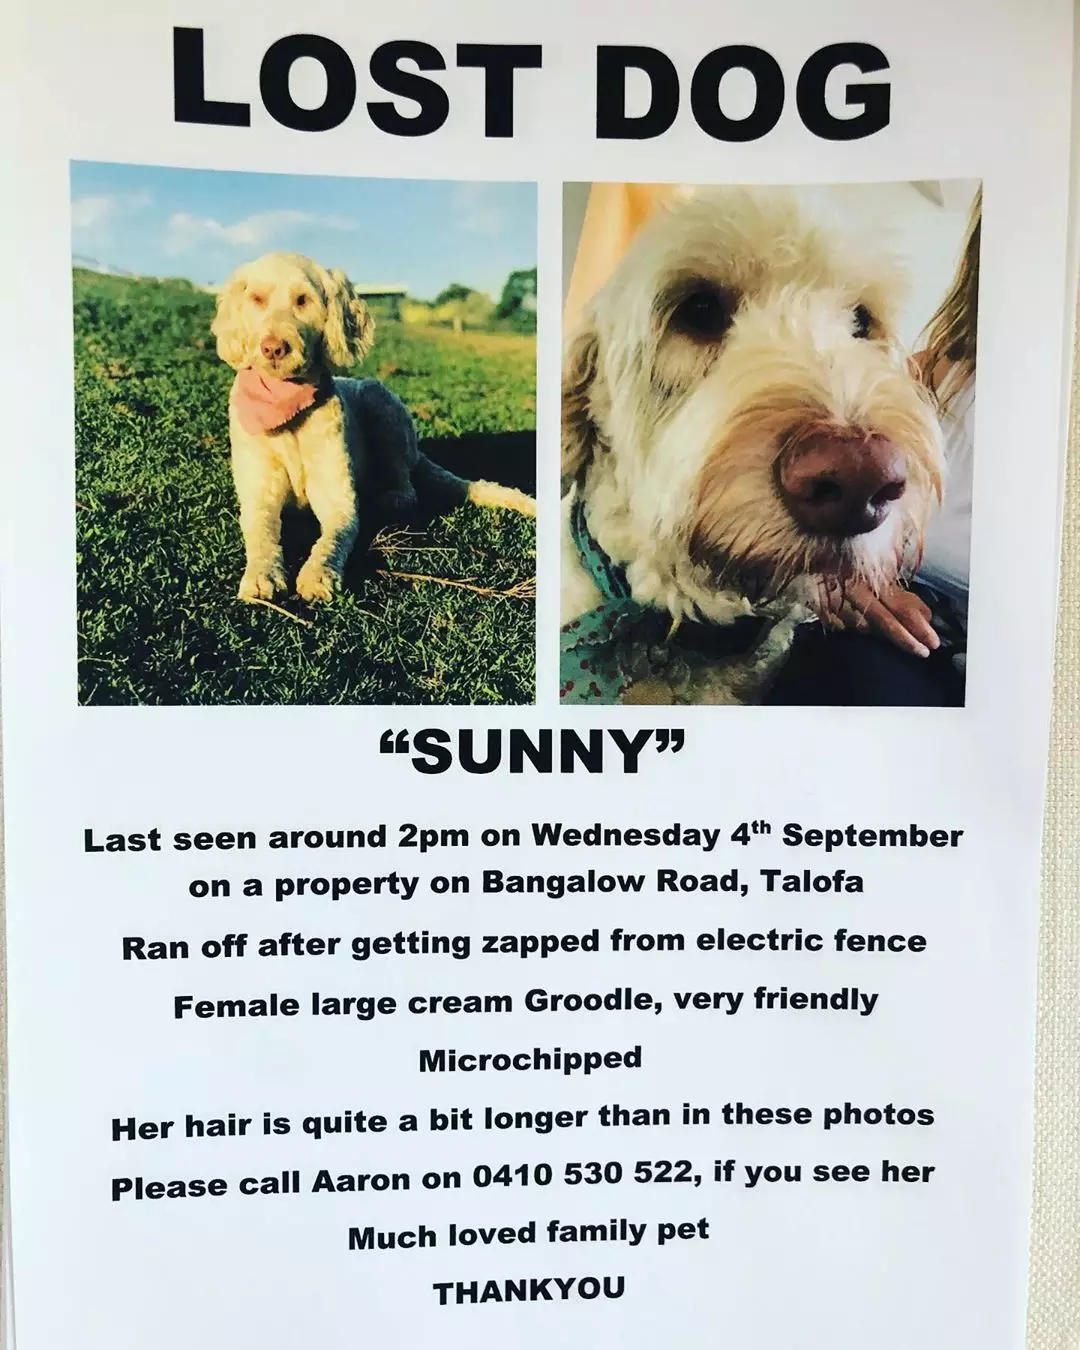 The missing dog poster.